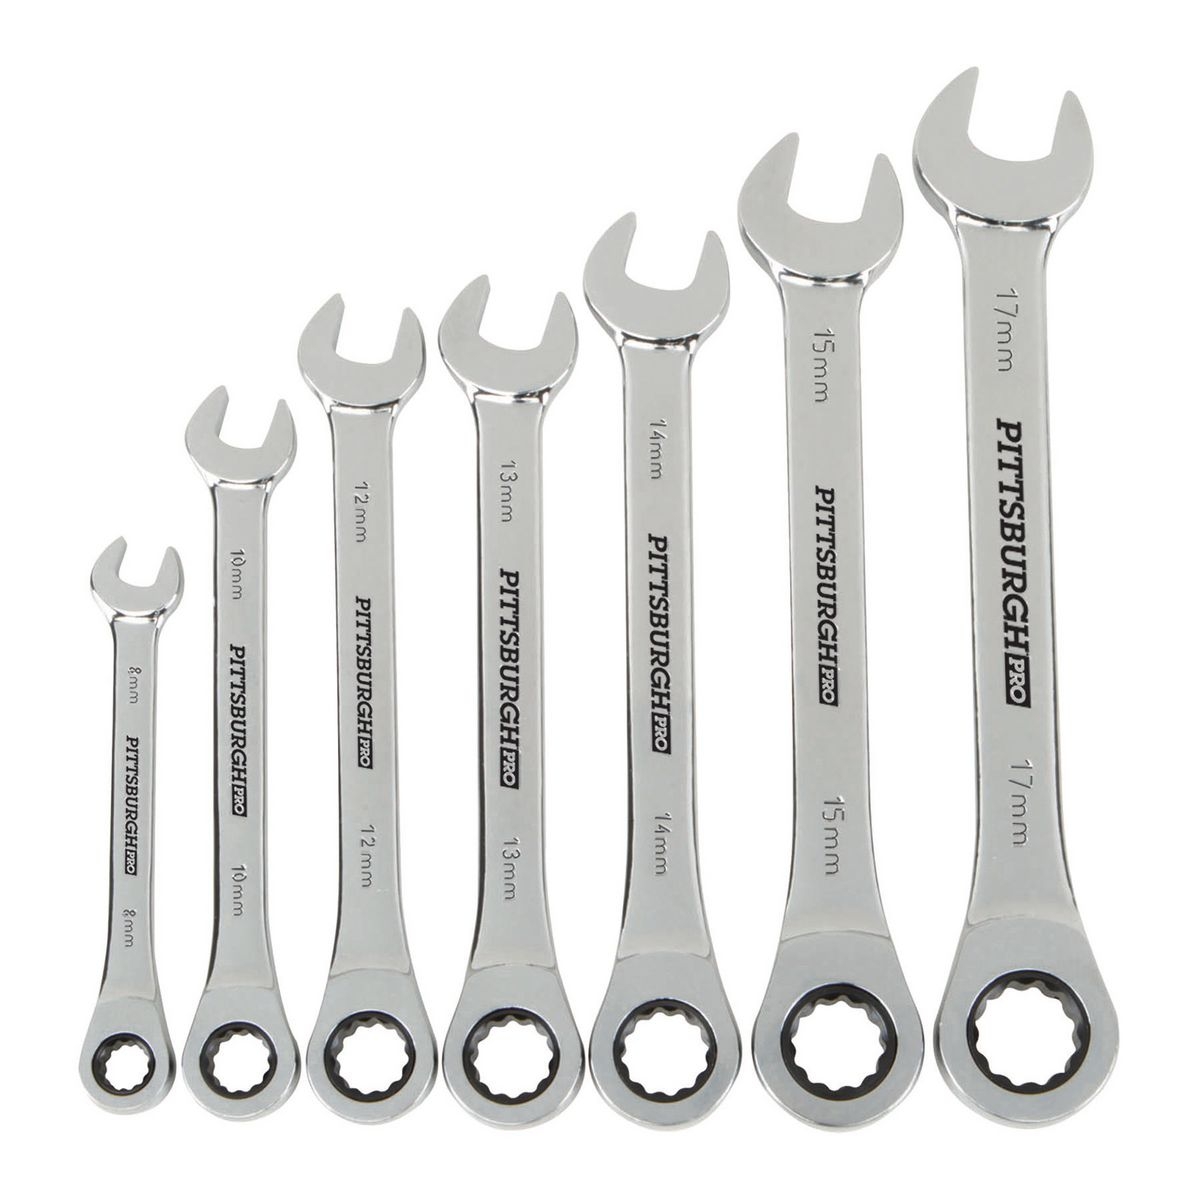 Search for Wrench Coupons